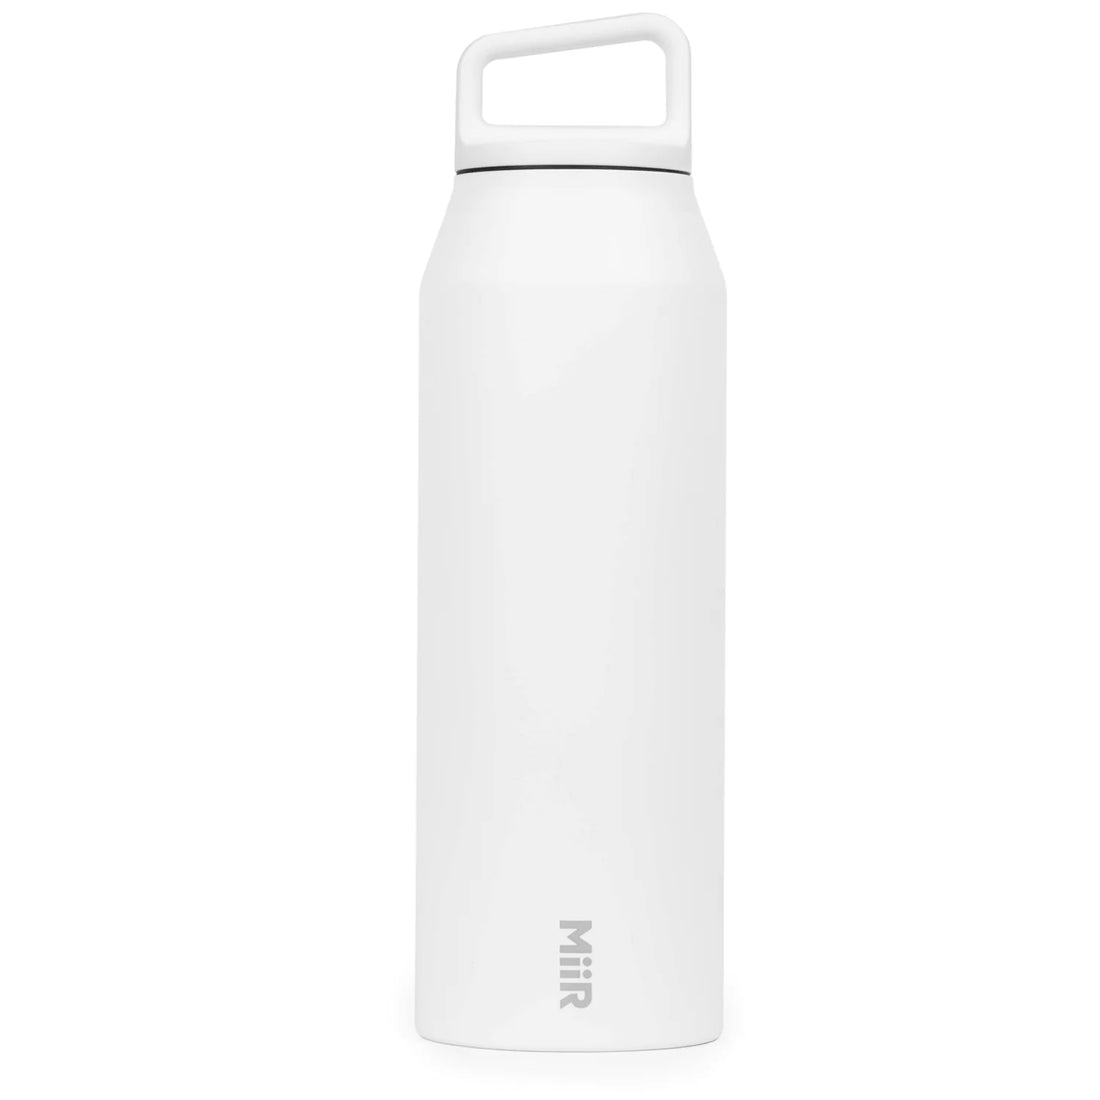 42oz Wide Mouth Insulated Water Bottle | White